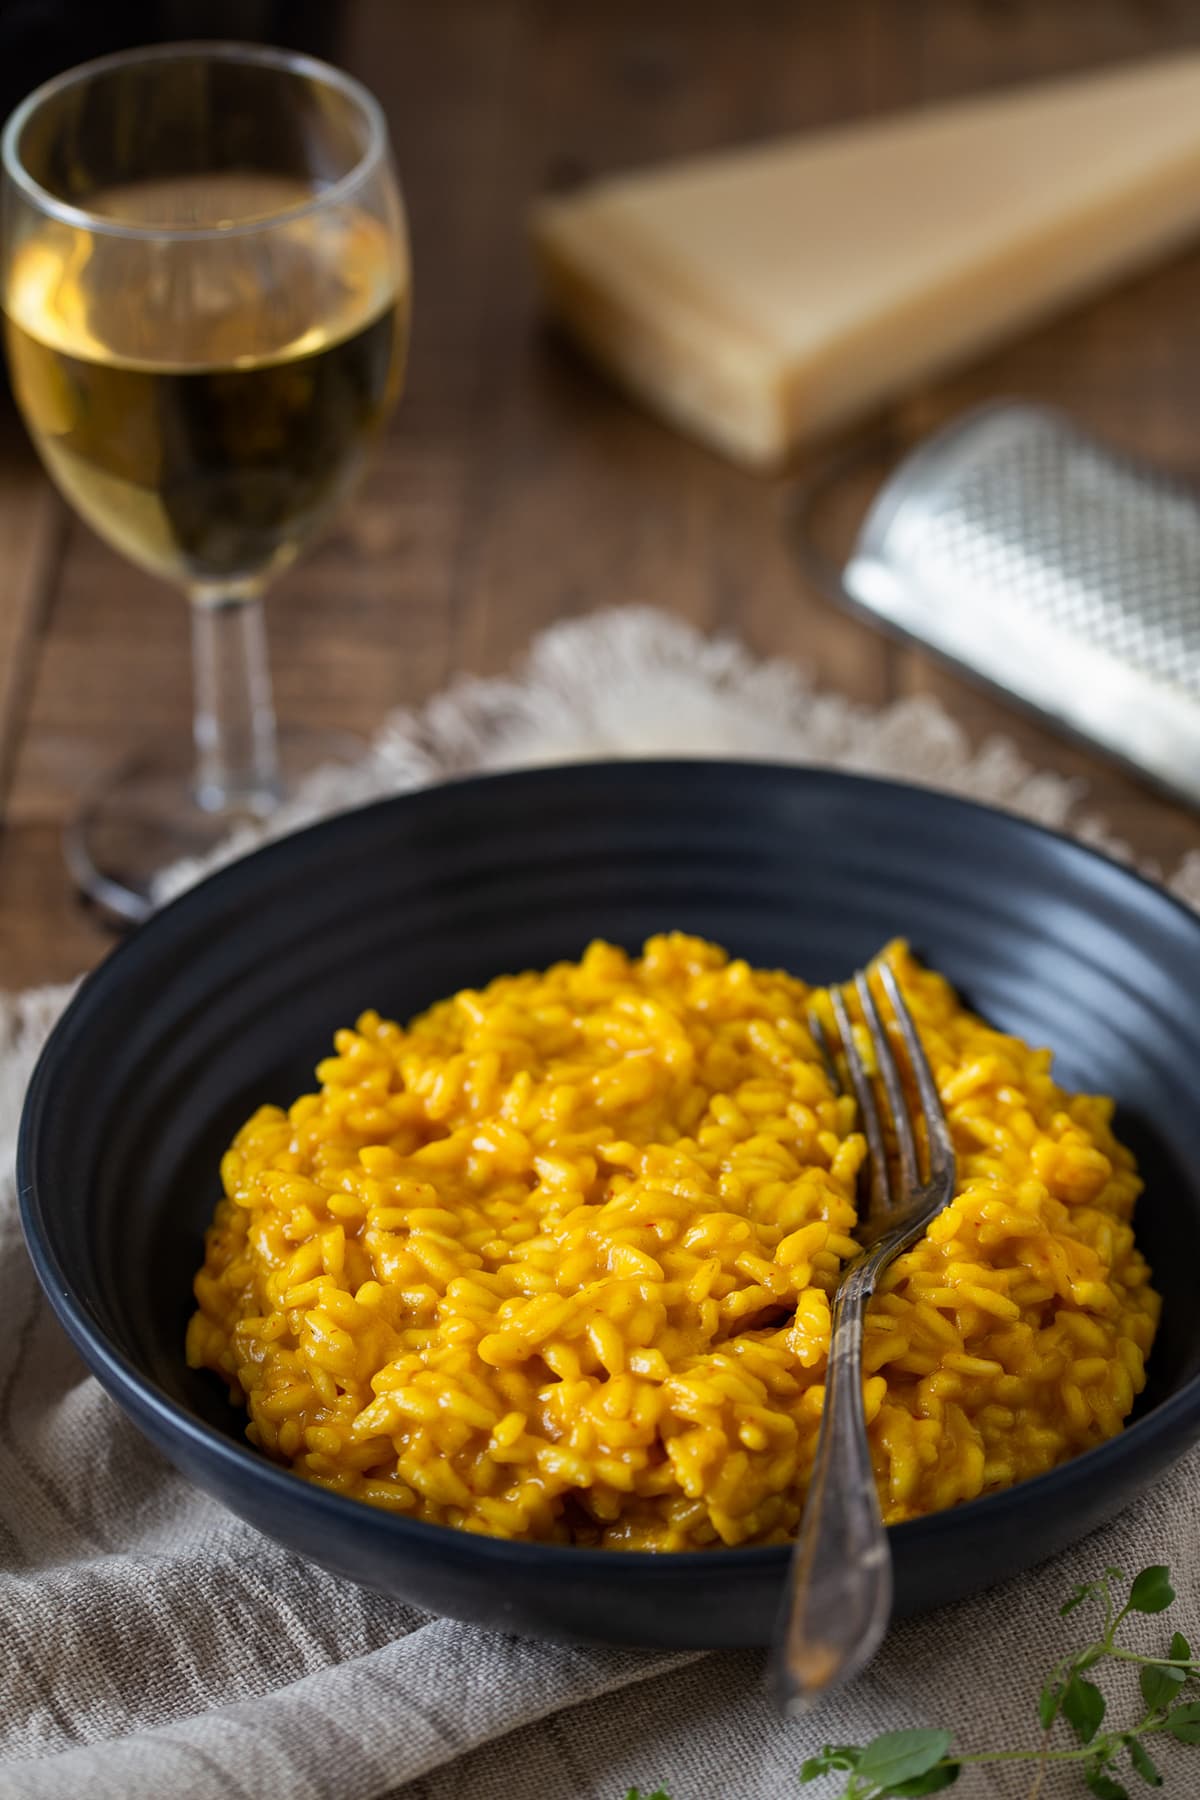 A portion of saffron risotto served with a glass of white wine.